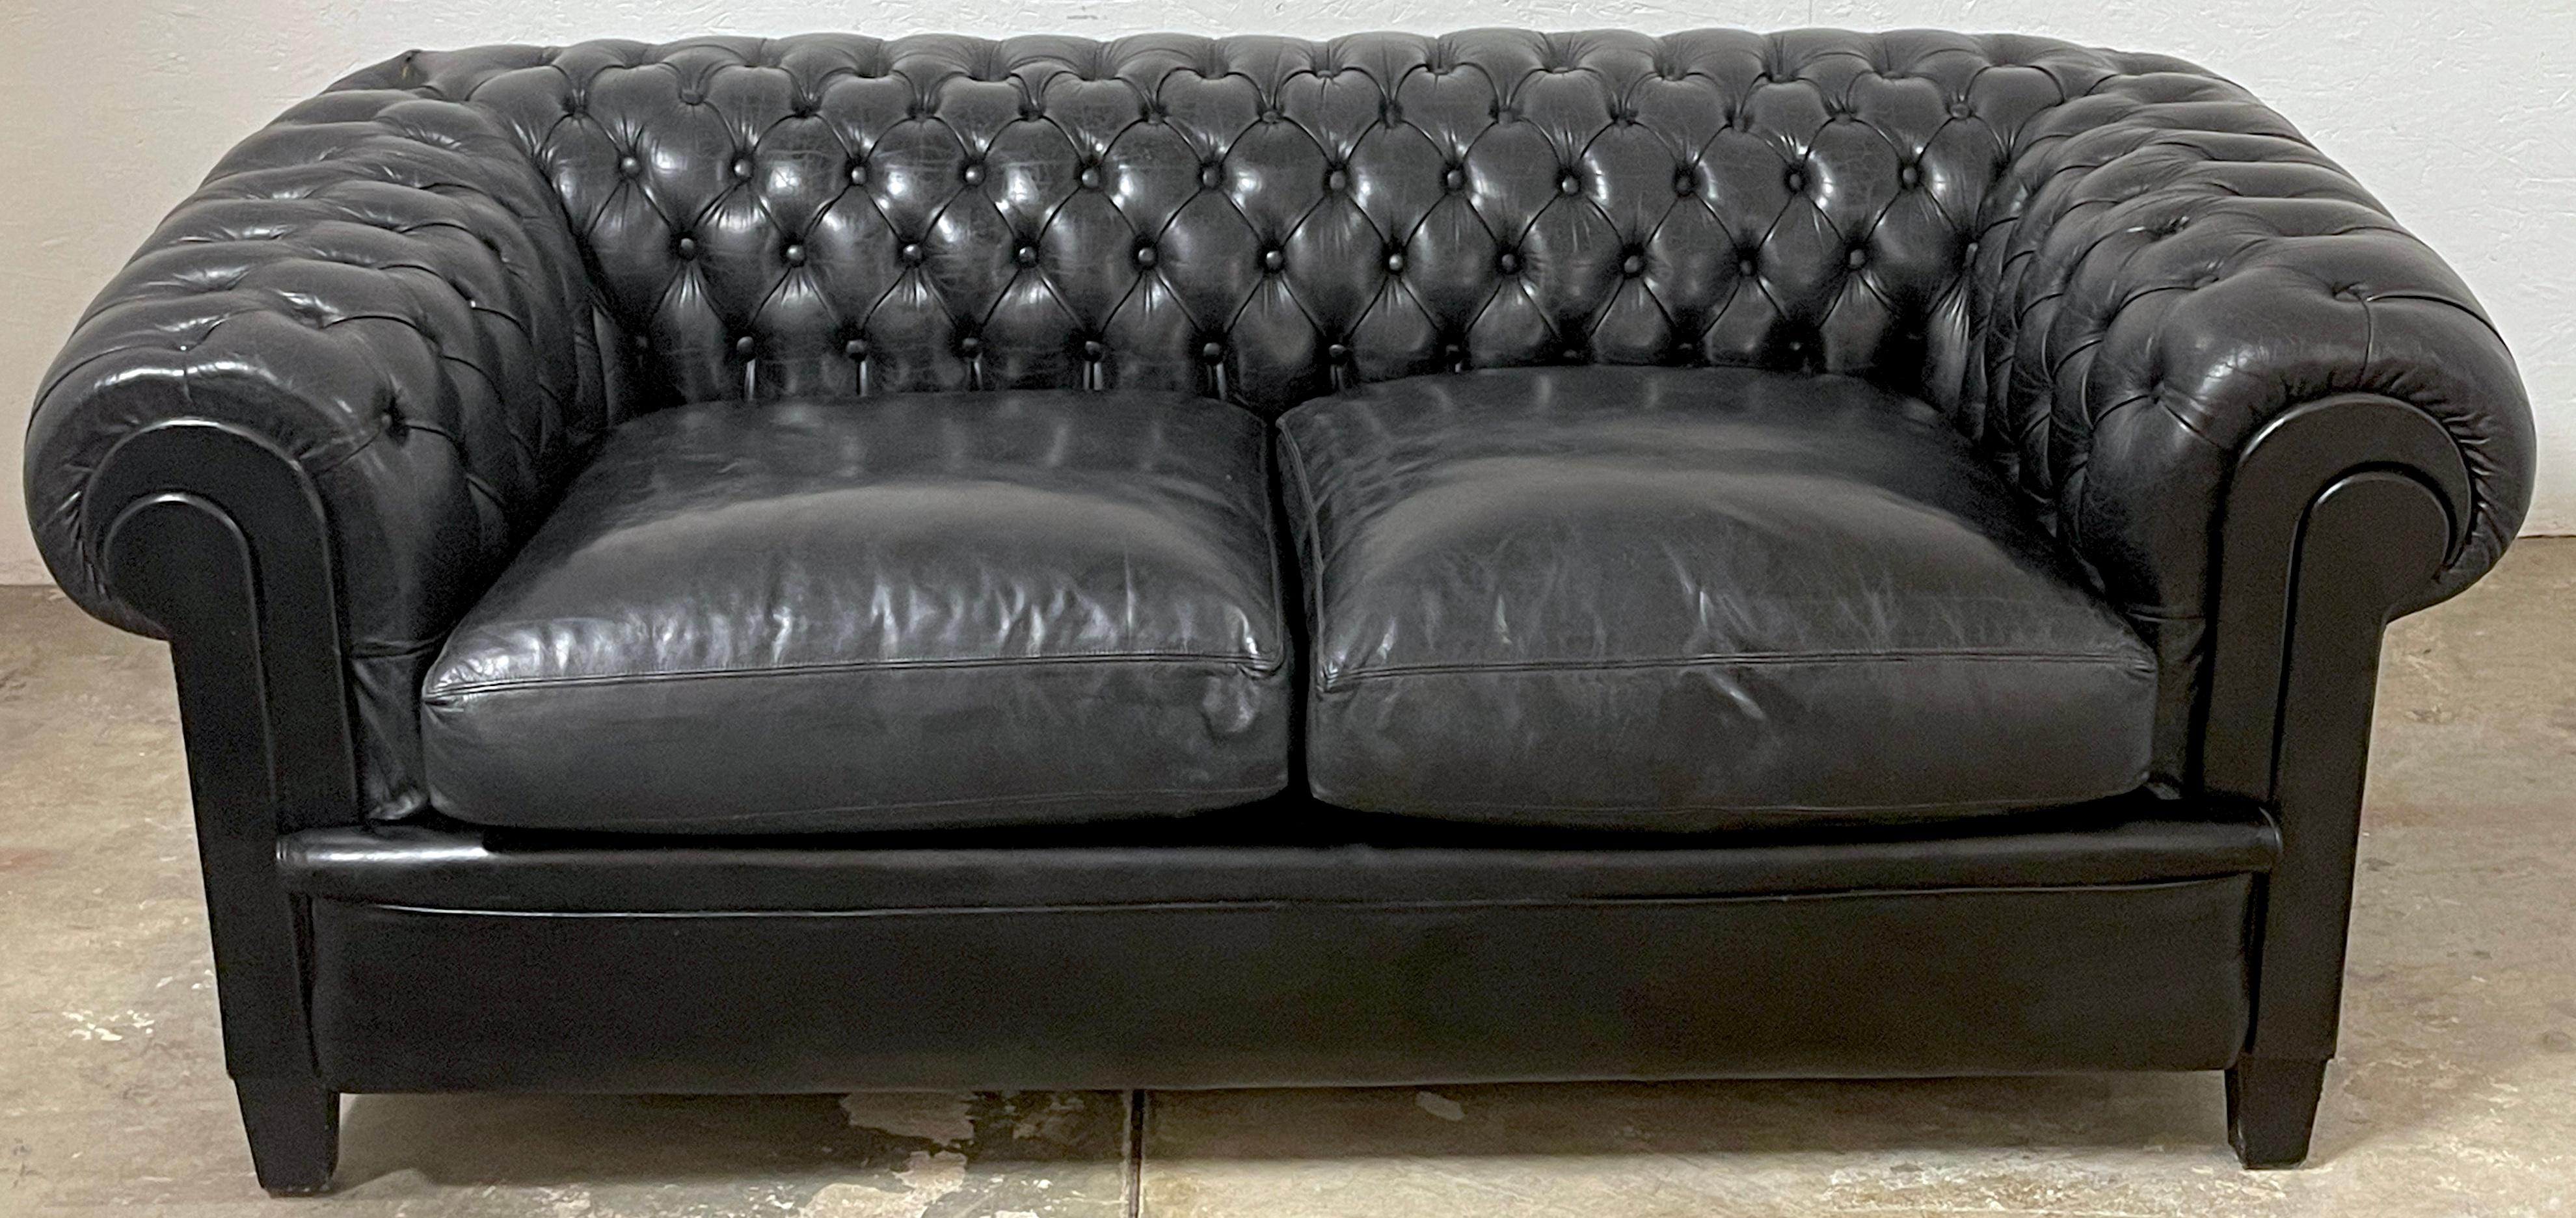 Gorgeous English Black Leather Chesterfield Sofa
England, 20th Century

This stunning 20th-century English Black Leather Chesterfield Sofa is a rare gem, boasting an uncommon midnight hue that exudes comfort. Its subtly distressed leather carries a